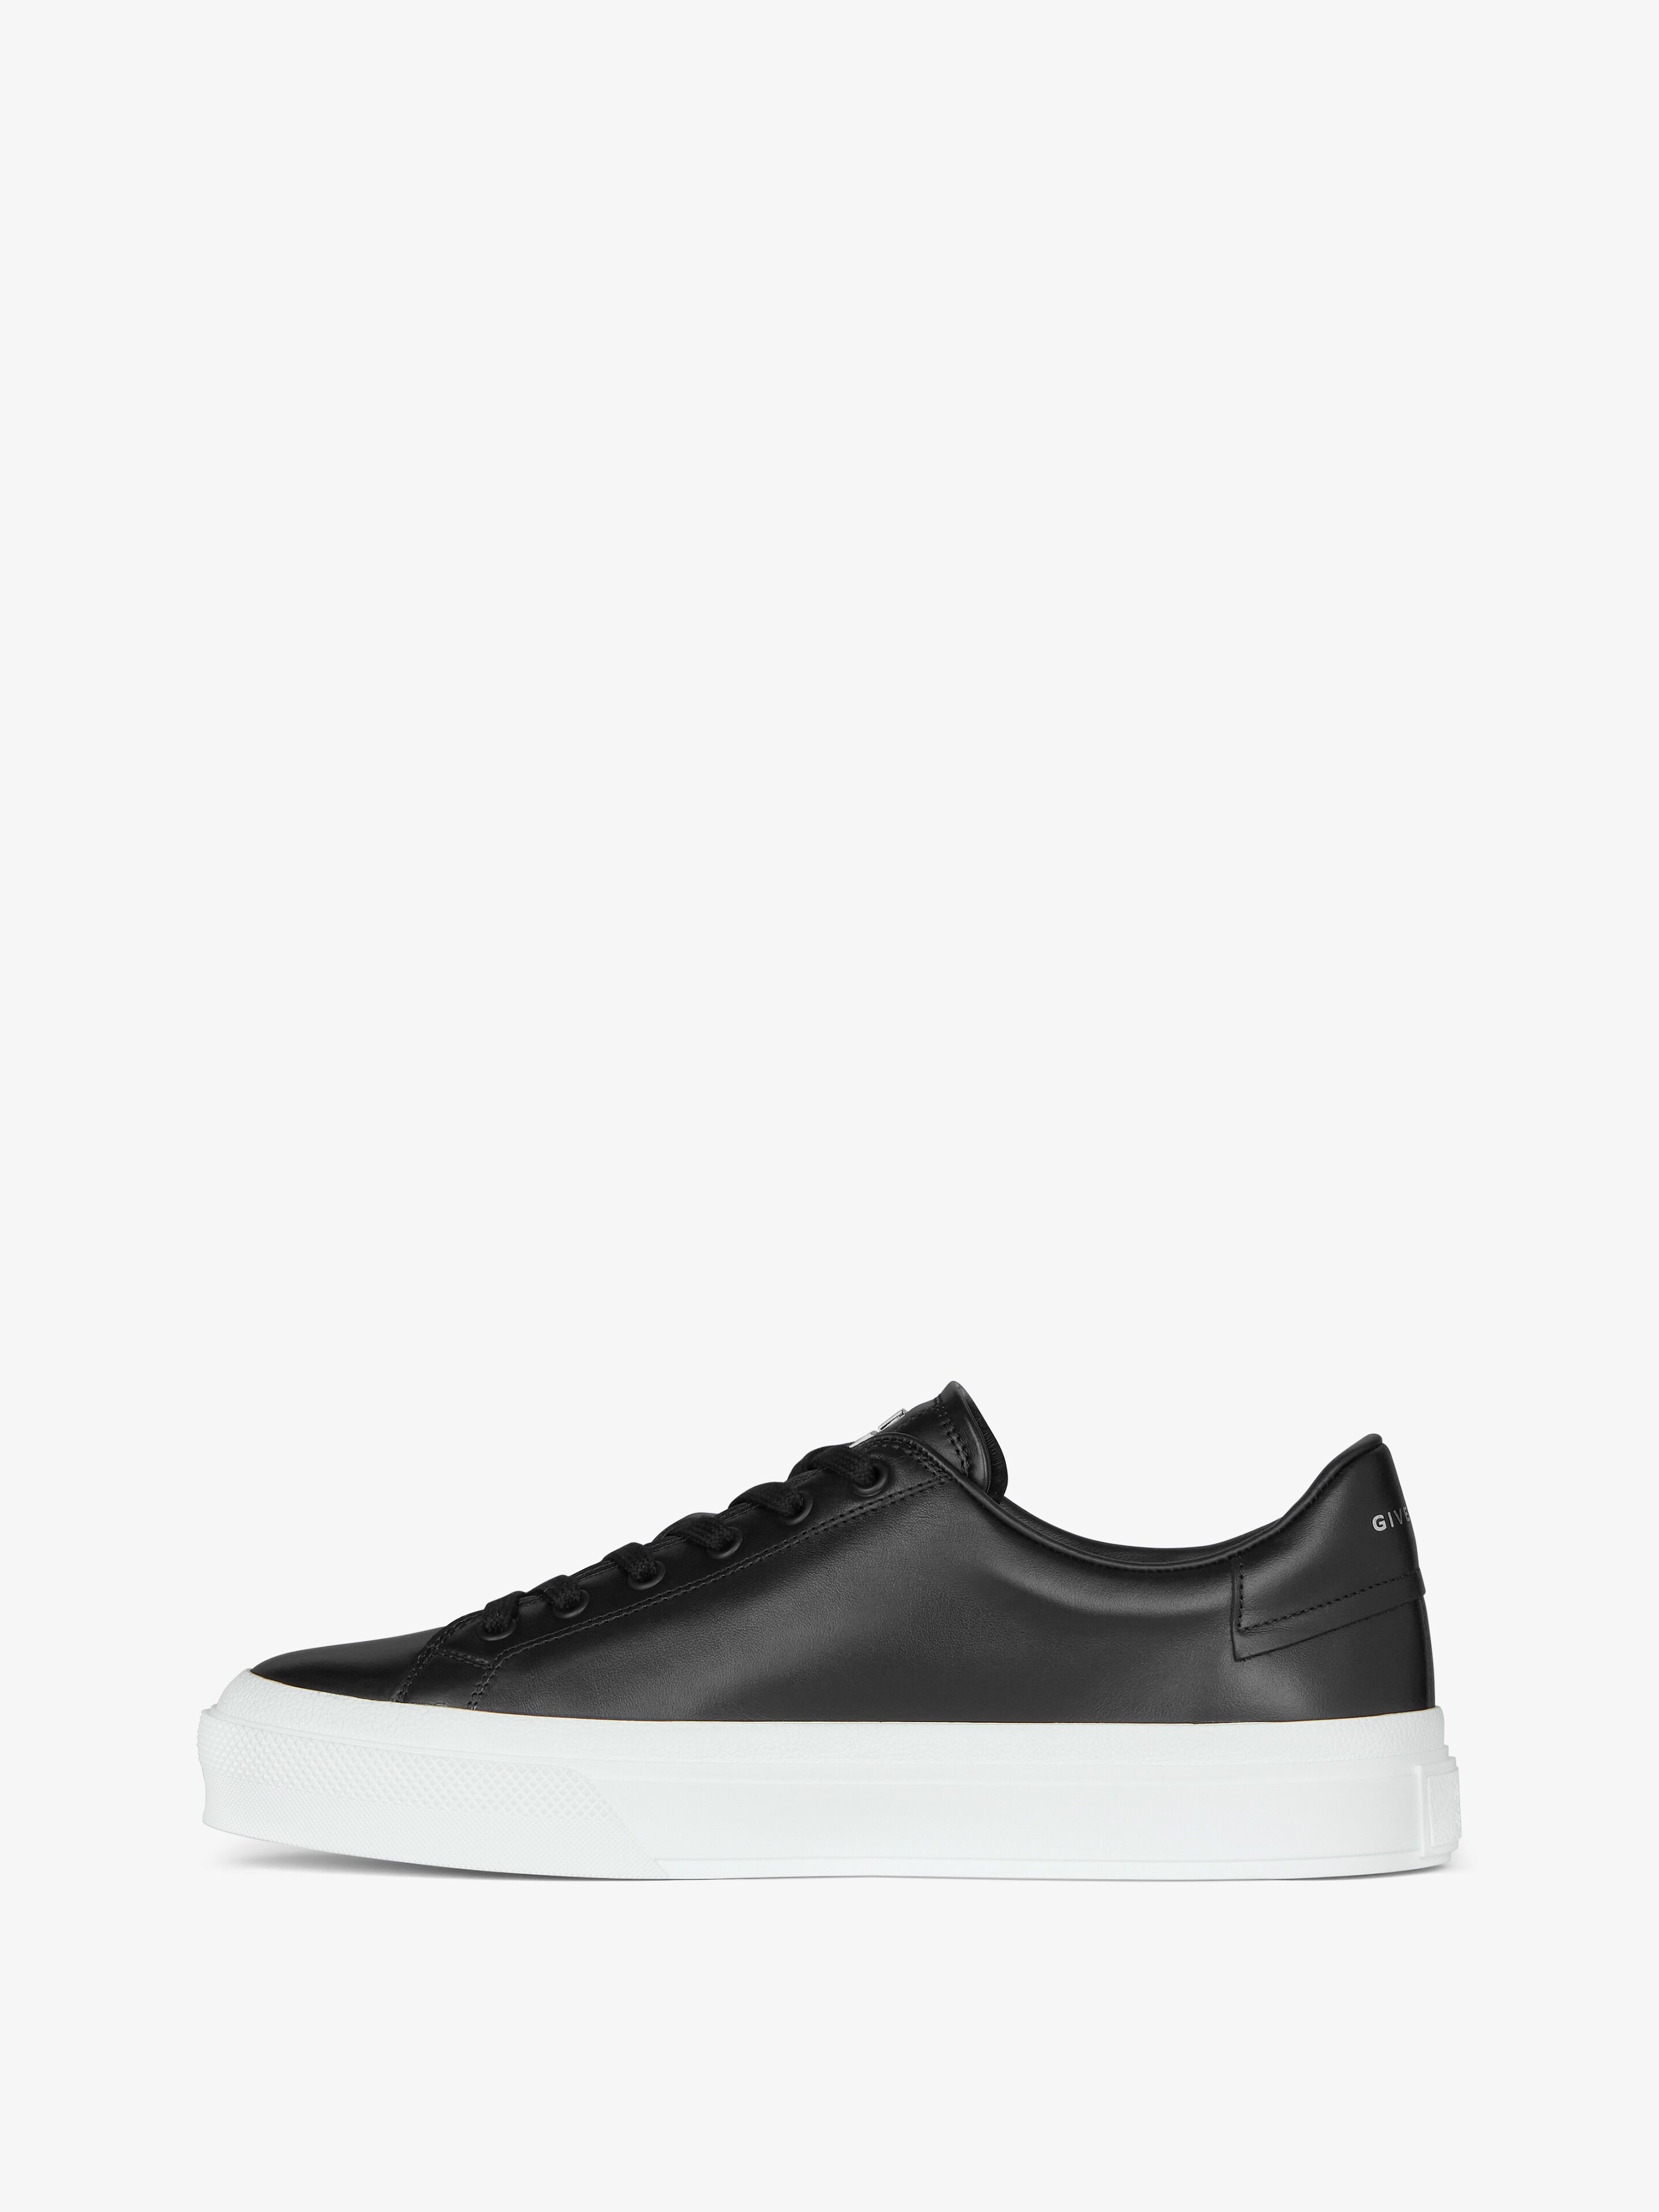 CITY SPORT SNEAKERS IN GIVENCHY LEATHER - 3